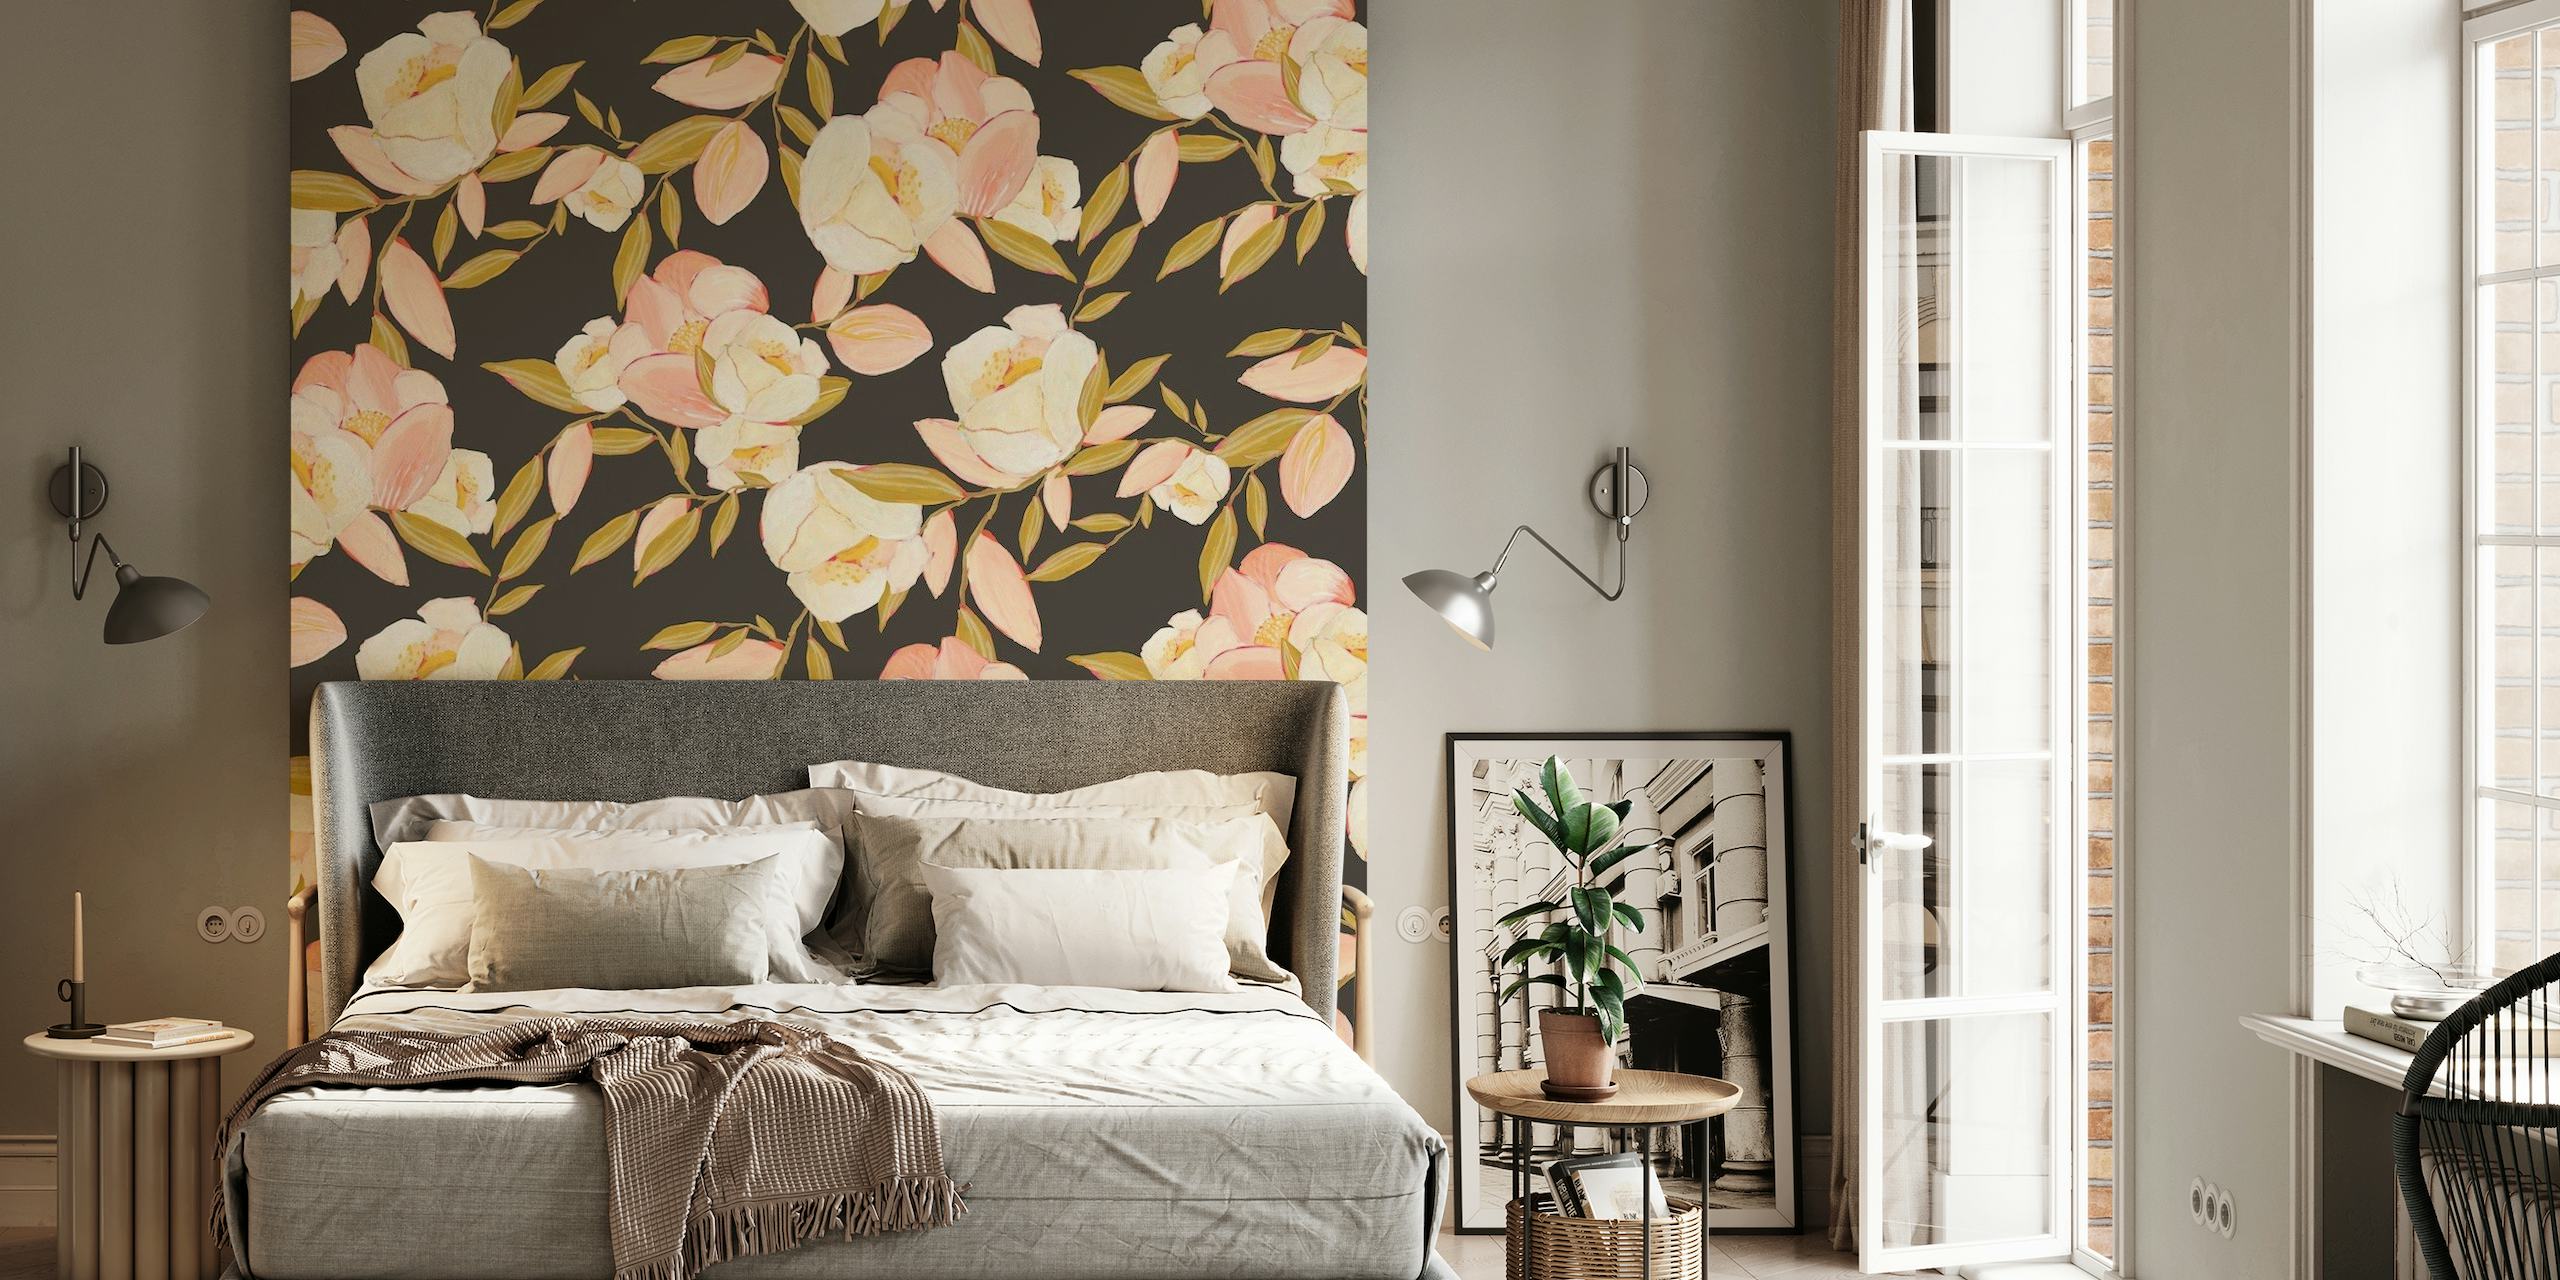 Moody floral arrangement wall mural with pastel blossoms and dark background